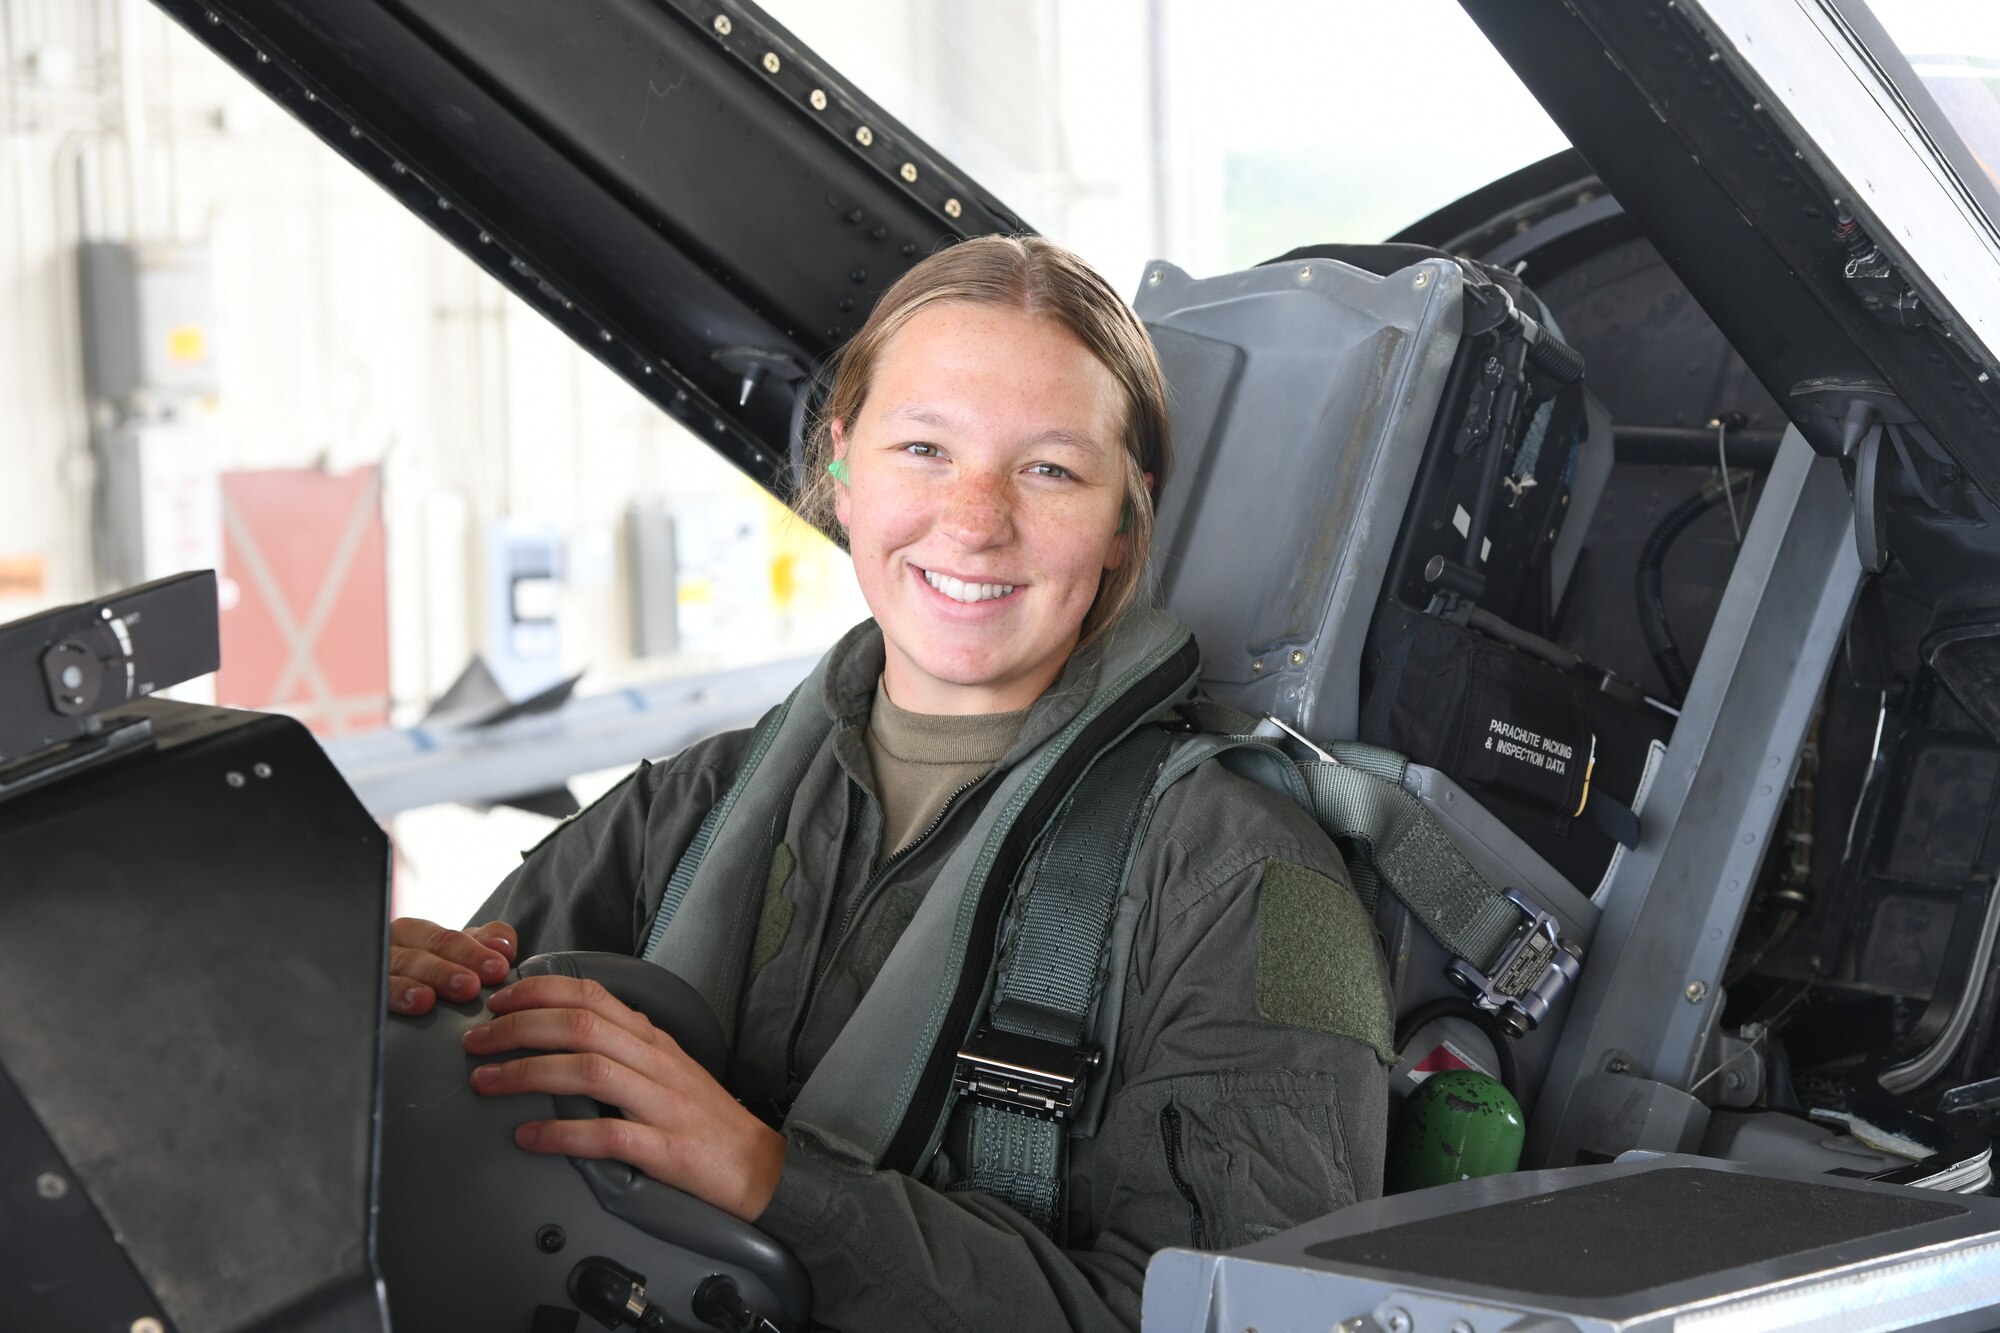 Traffic Management Specialist, Senior Airman Mallory Sunnarborg, smiles after receiving an F-16 familiarization flight on August 11, 2023.